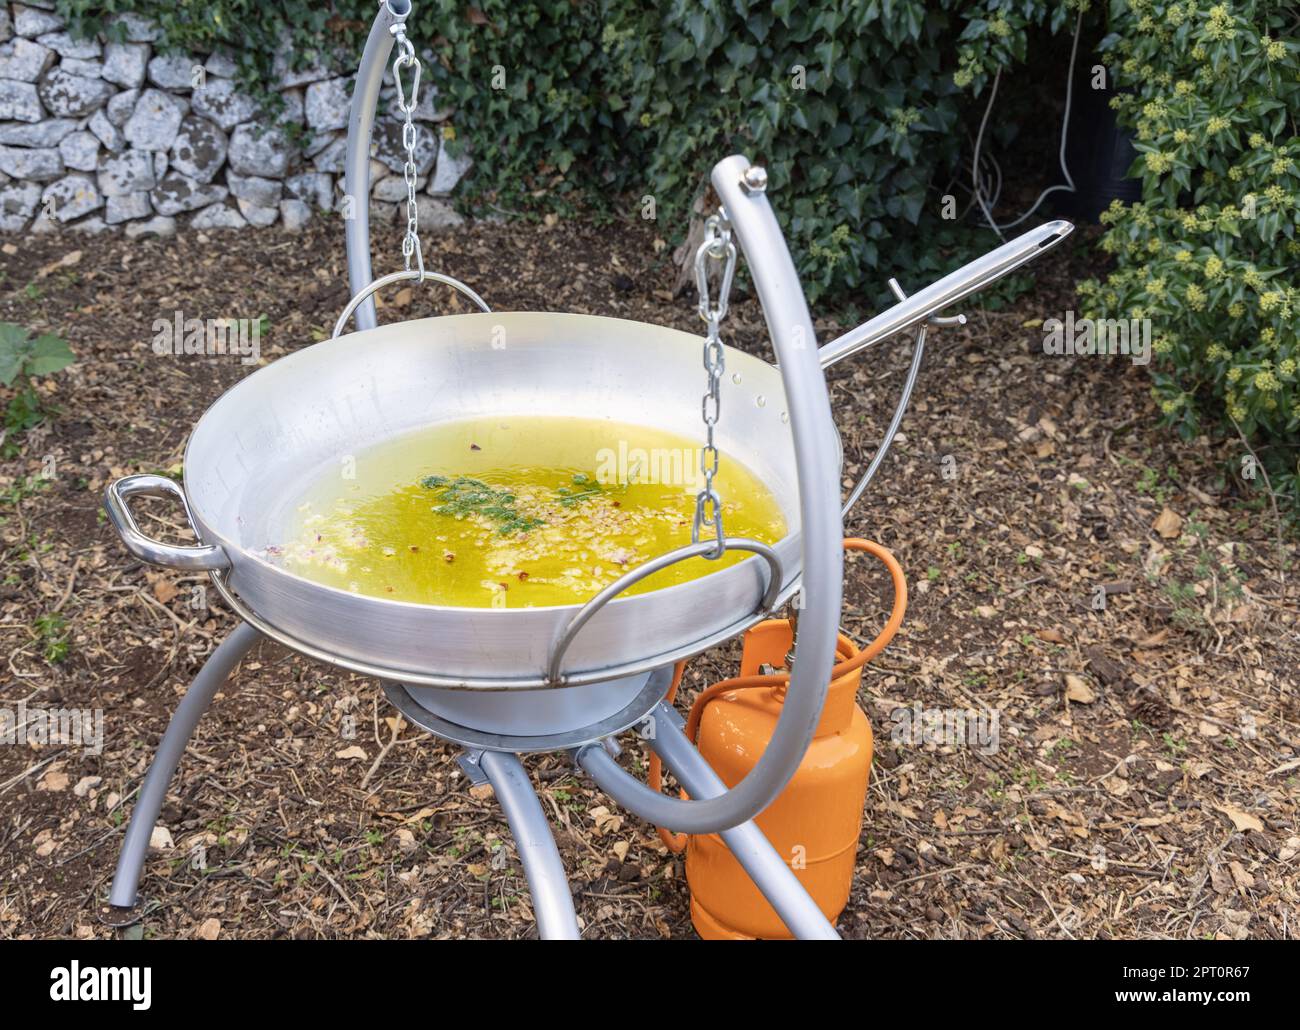 https://c8.alamy.com/comp/2PT0R67/chopped-garlic-and-onion-frying-with-olive-oil-in-a-big-frying-pan-outdoor-close-up-traditional-italian-and-apulian-cousine-cooking-for-huge-family-2PT0R67.jpg